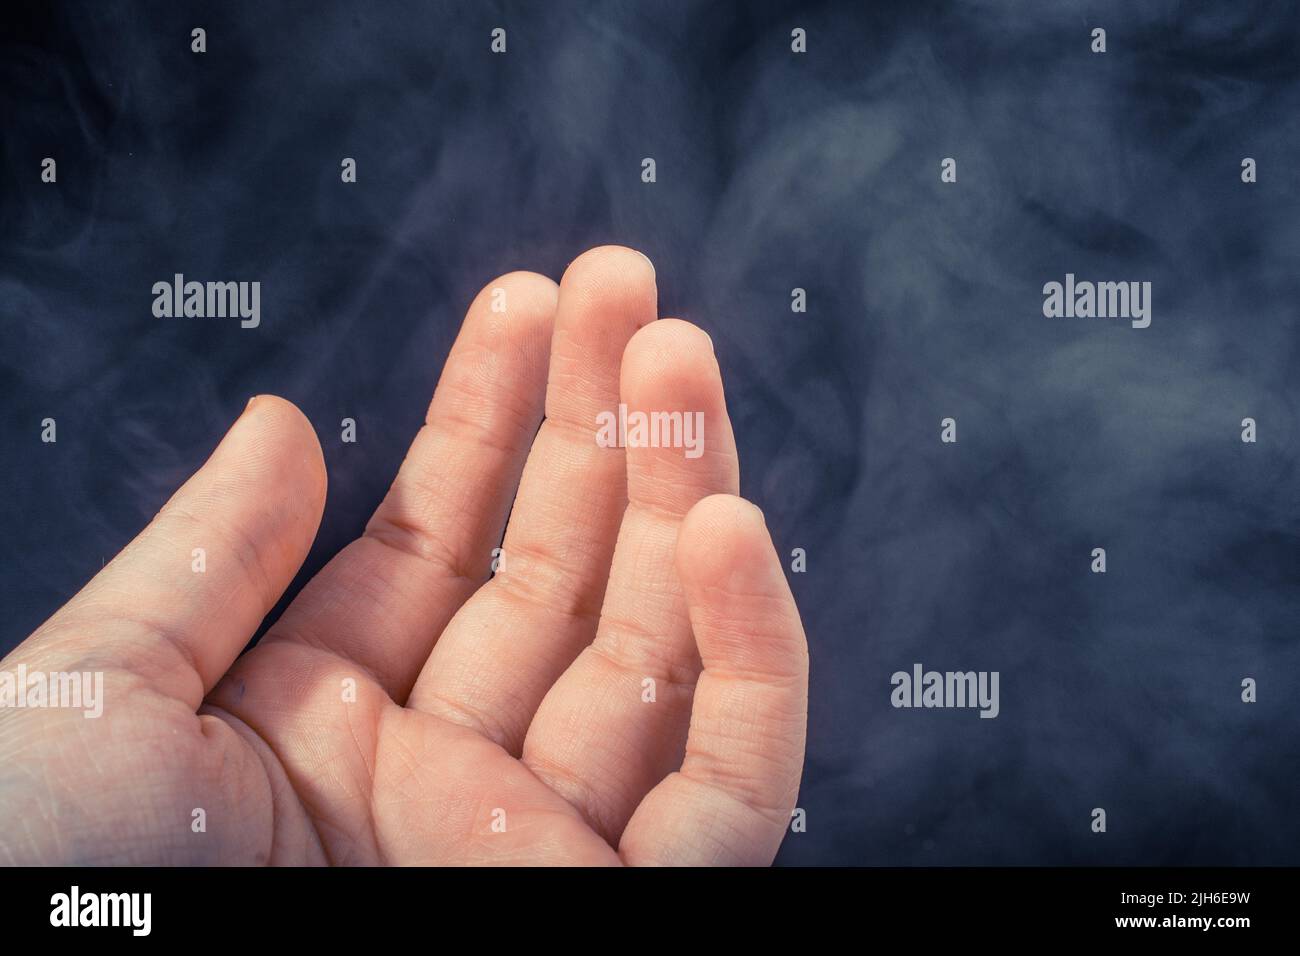 Hand making a gesture on a black smoky background Stock Photo